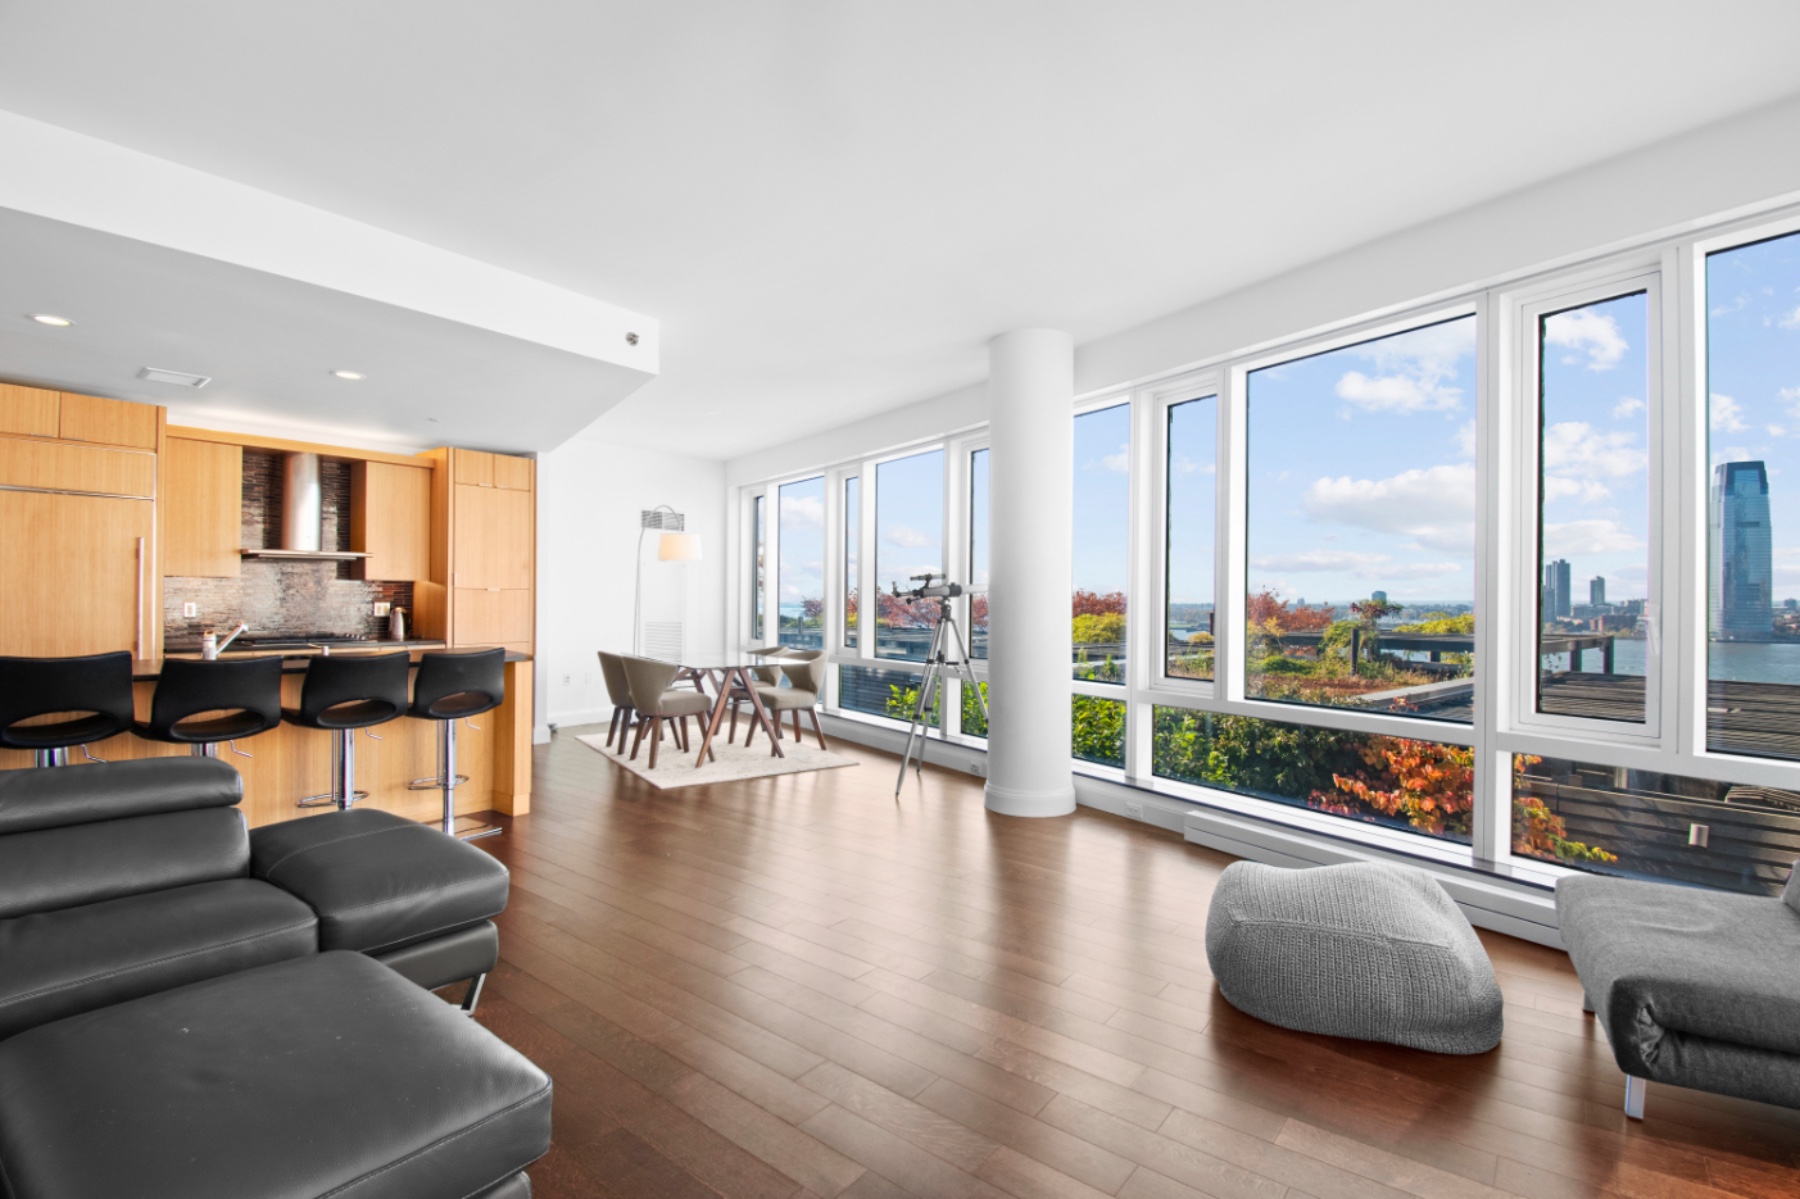 70 Little West Street 14C, Battery Park City, Downtown, NYC - 2 Bedrooms  
2 Bathrooms  
5 Rooms - 